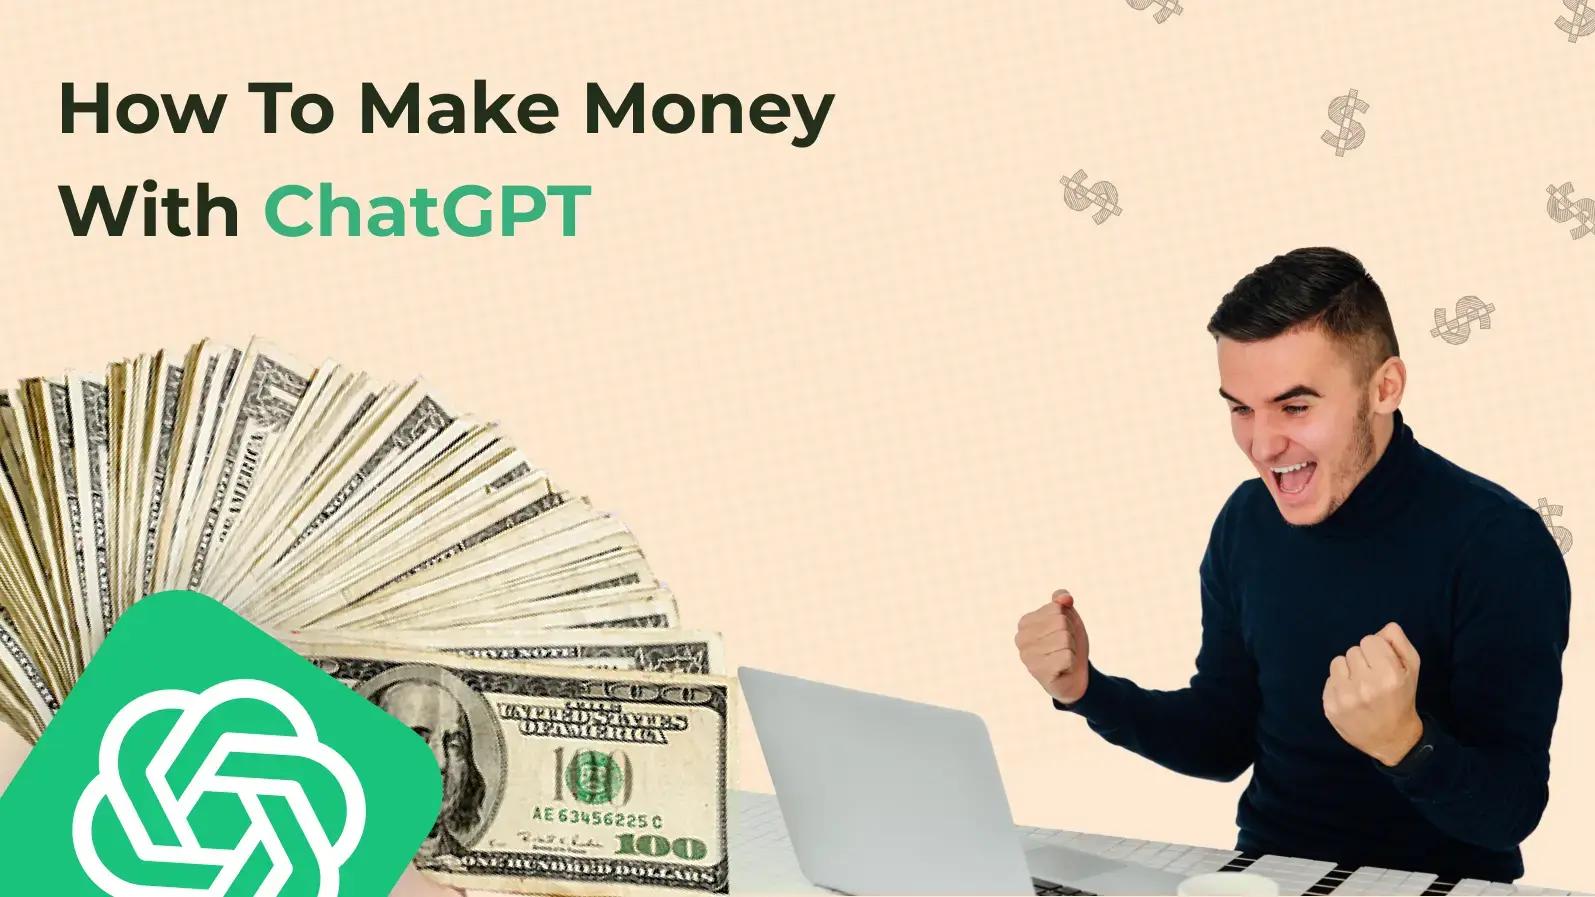 How To Make Money with ChatGPT